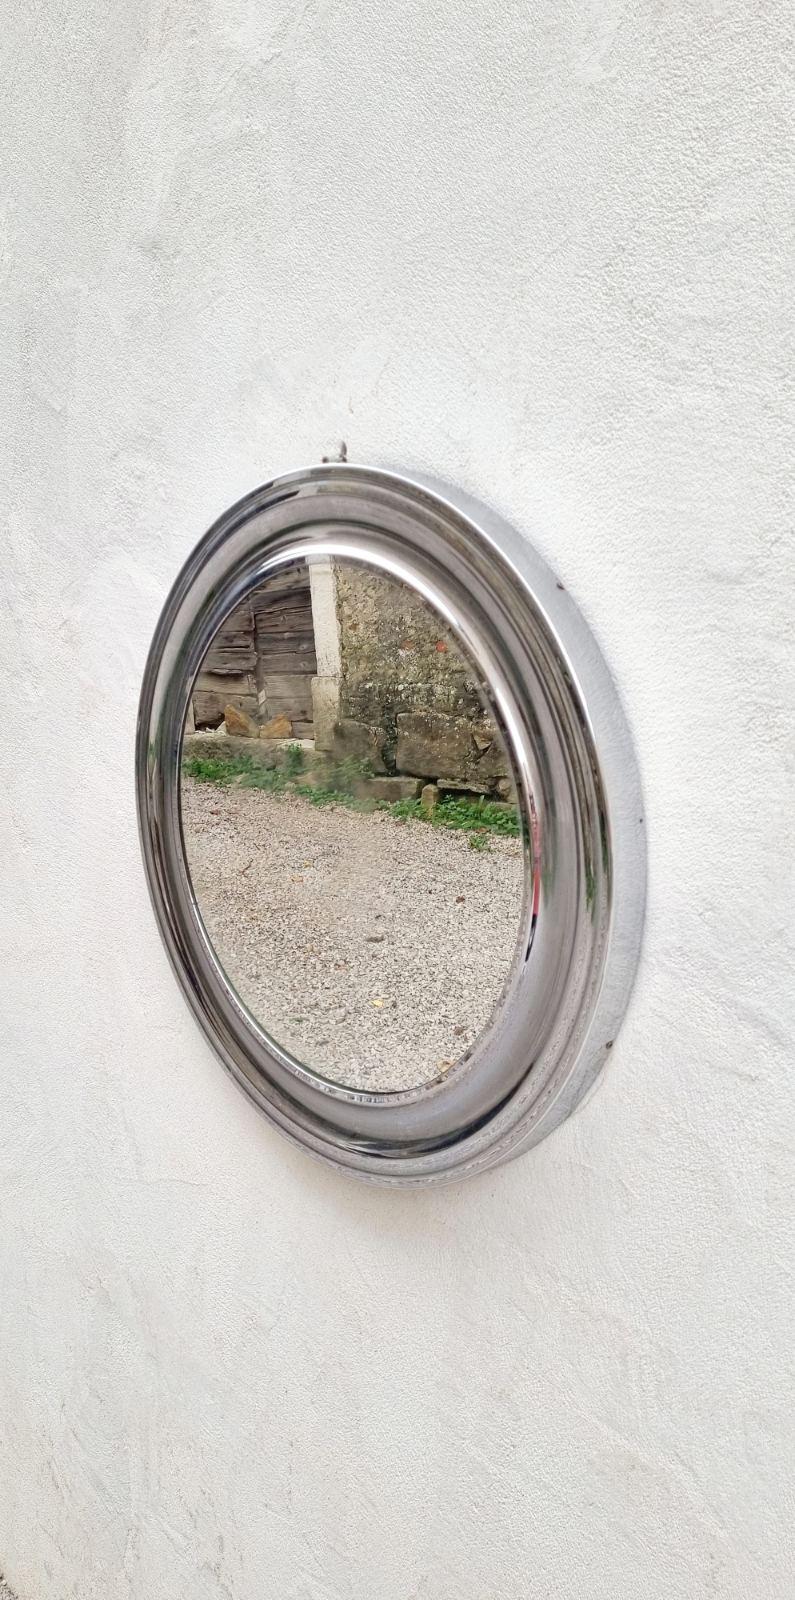 Mid-20th Century Narciso Round Wall Mirror, Design by Sergio Mazza for Artemide, Italy 70s For Sale